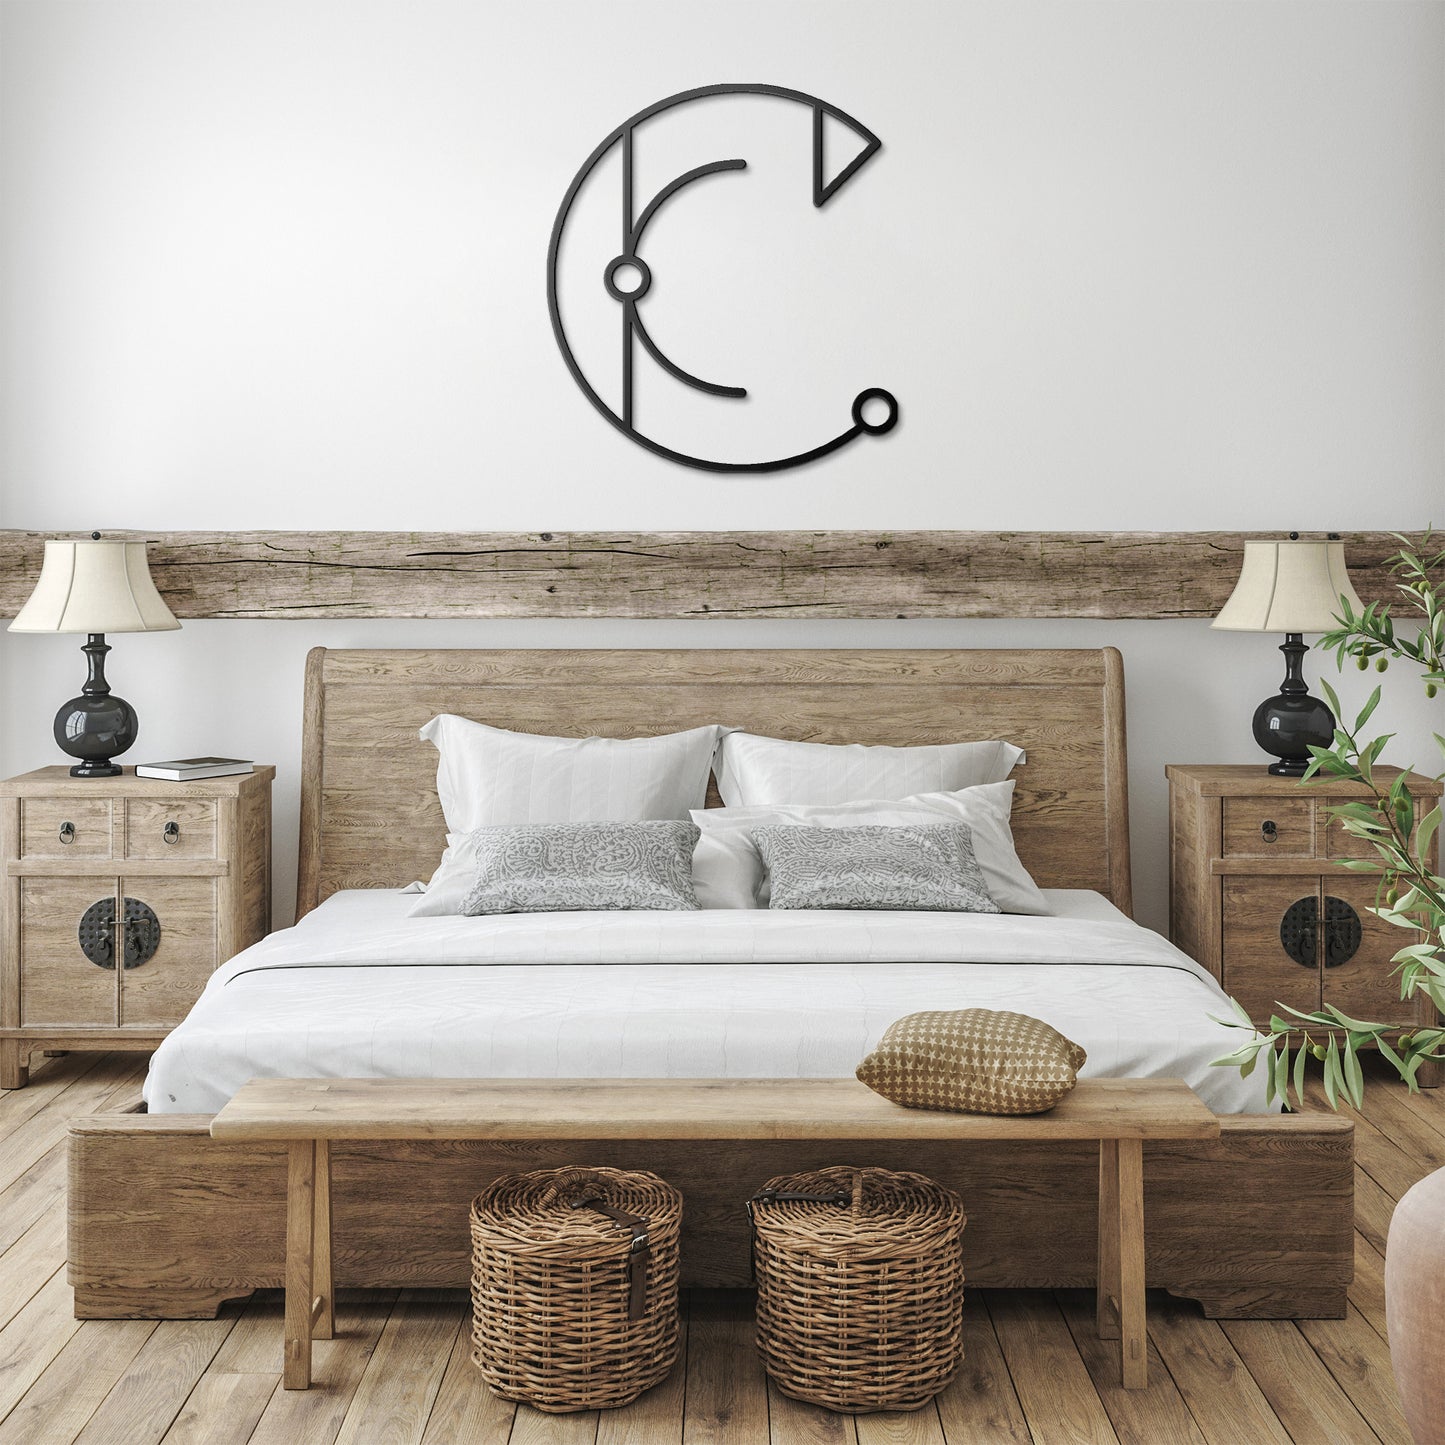 Letter C, Your Initial, Art Deco Letters, Monogram, Metal Signs, Rustic Sign, Wall Art, Wall Decor